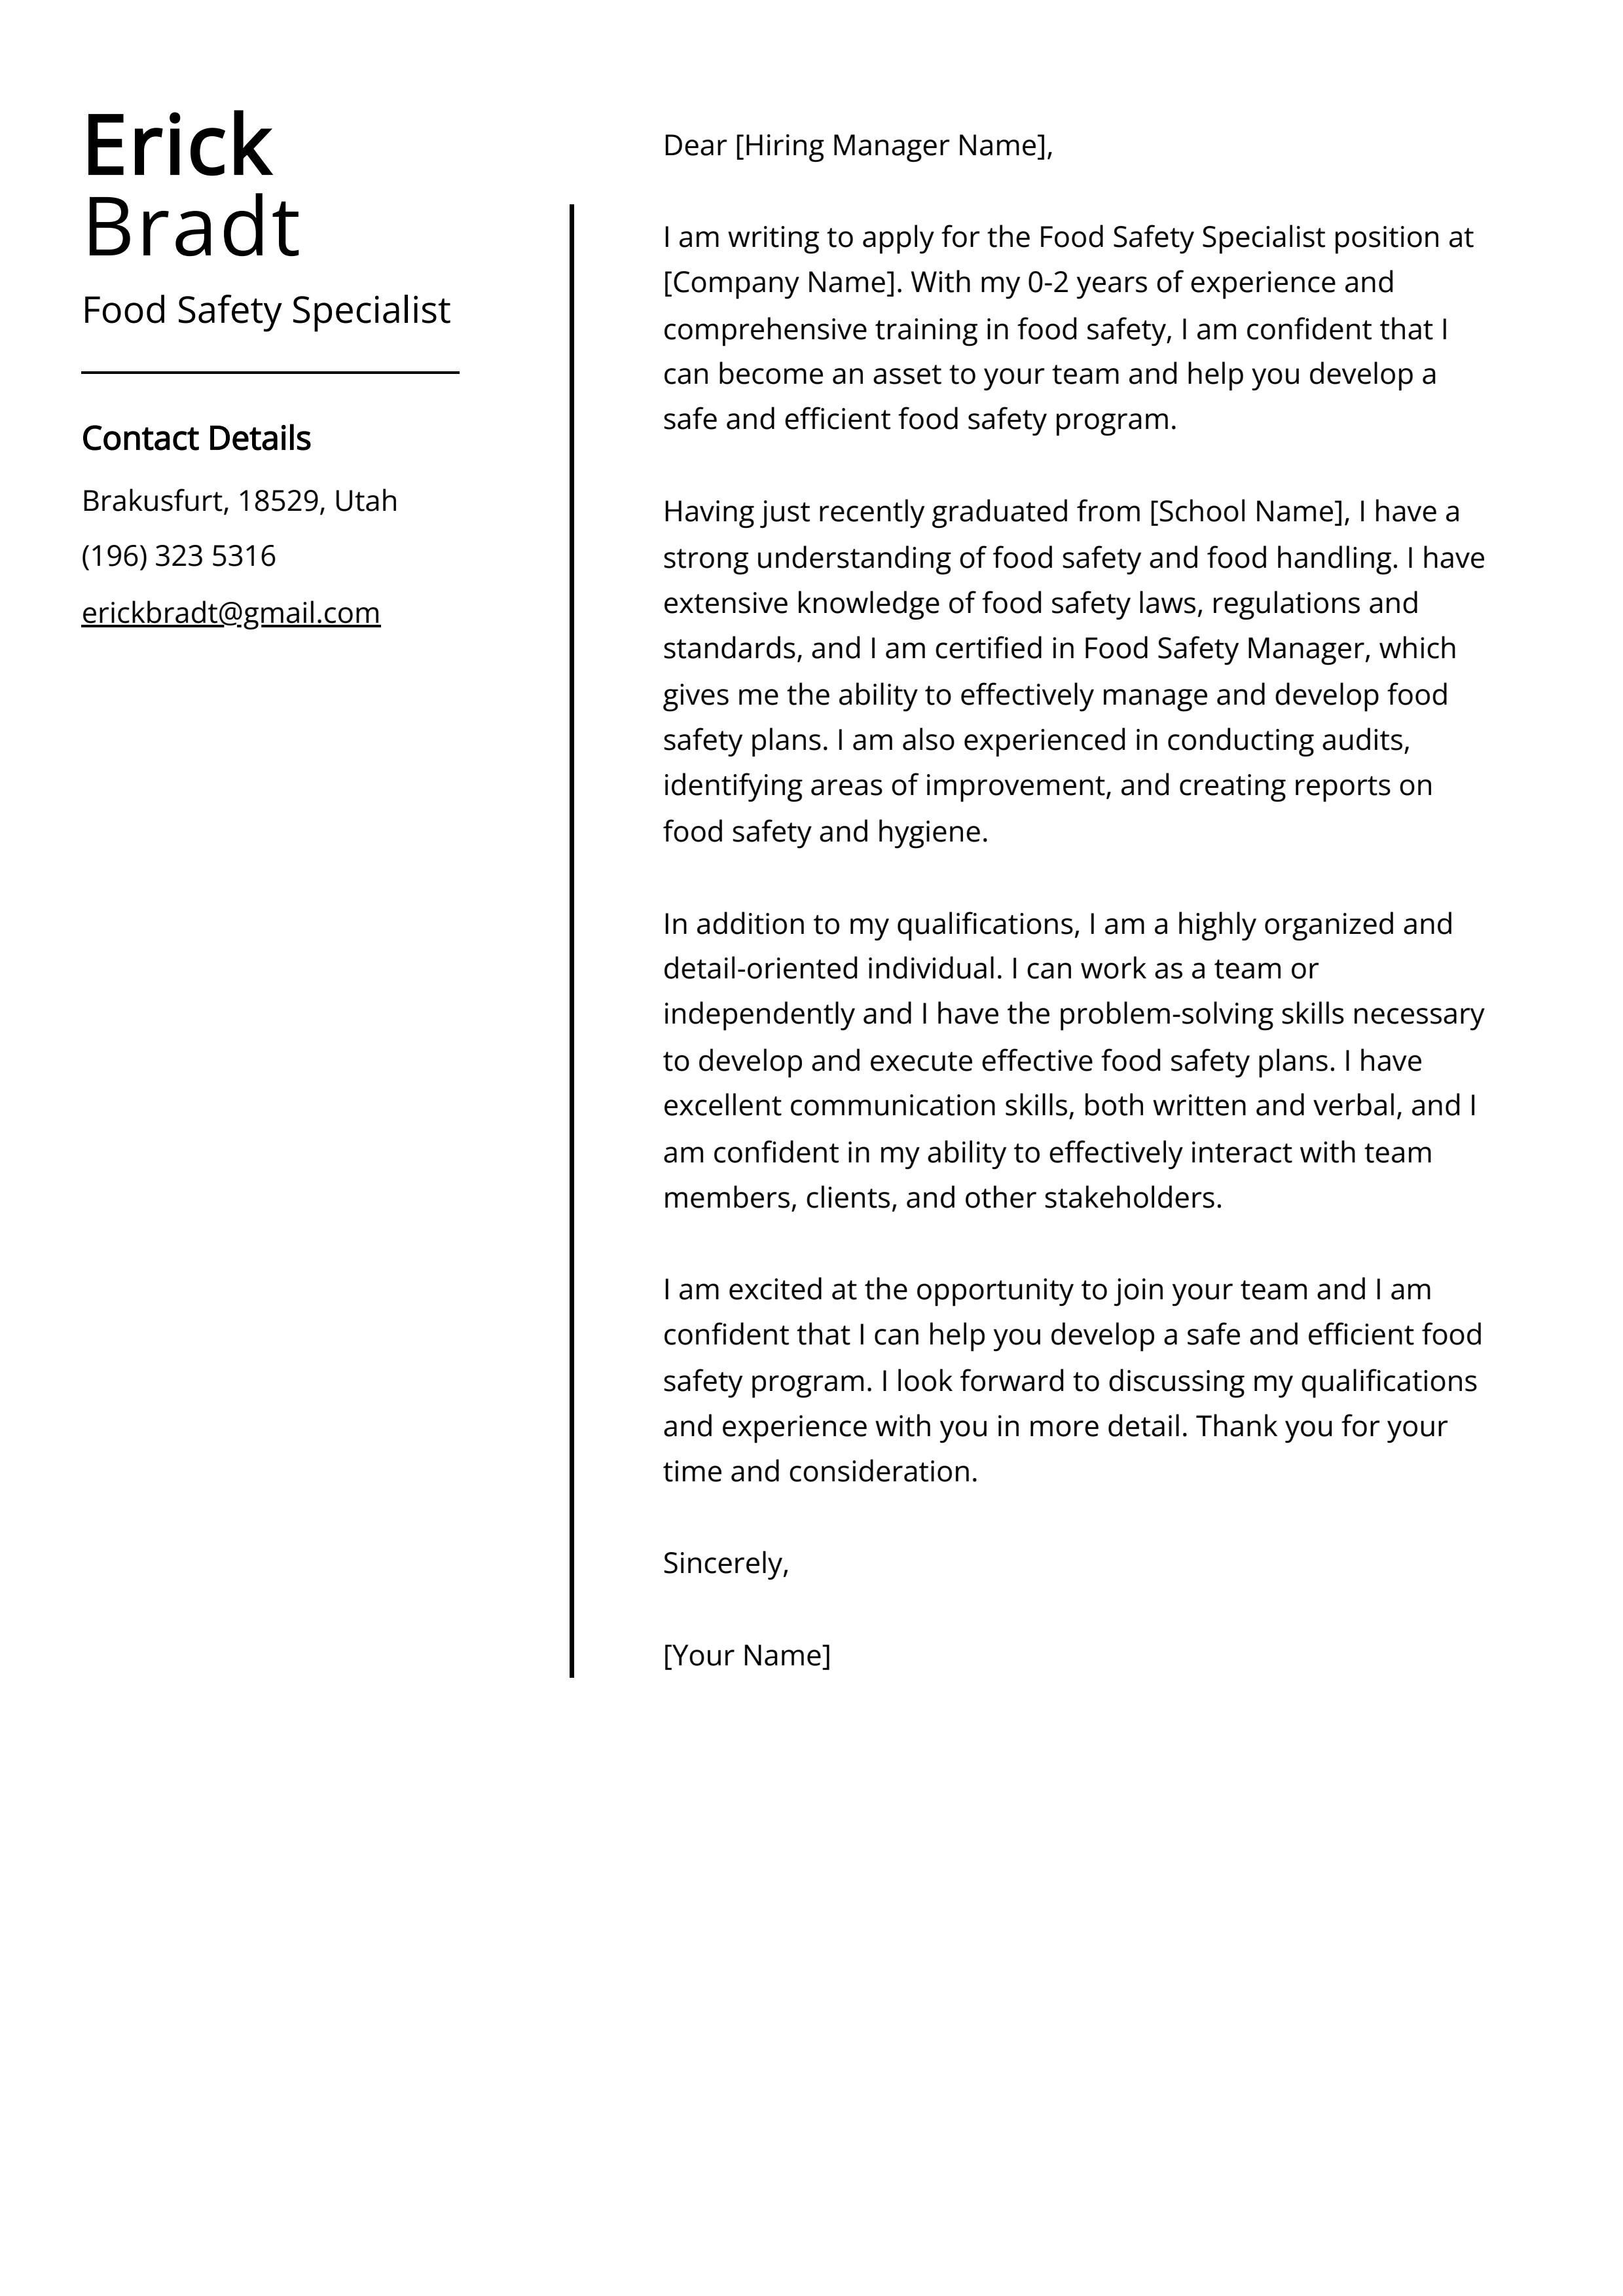 Food Safety Specialist Cover Letter Example